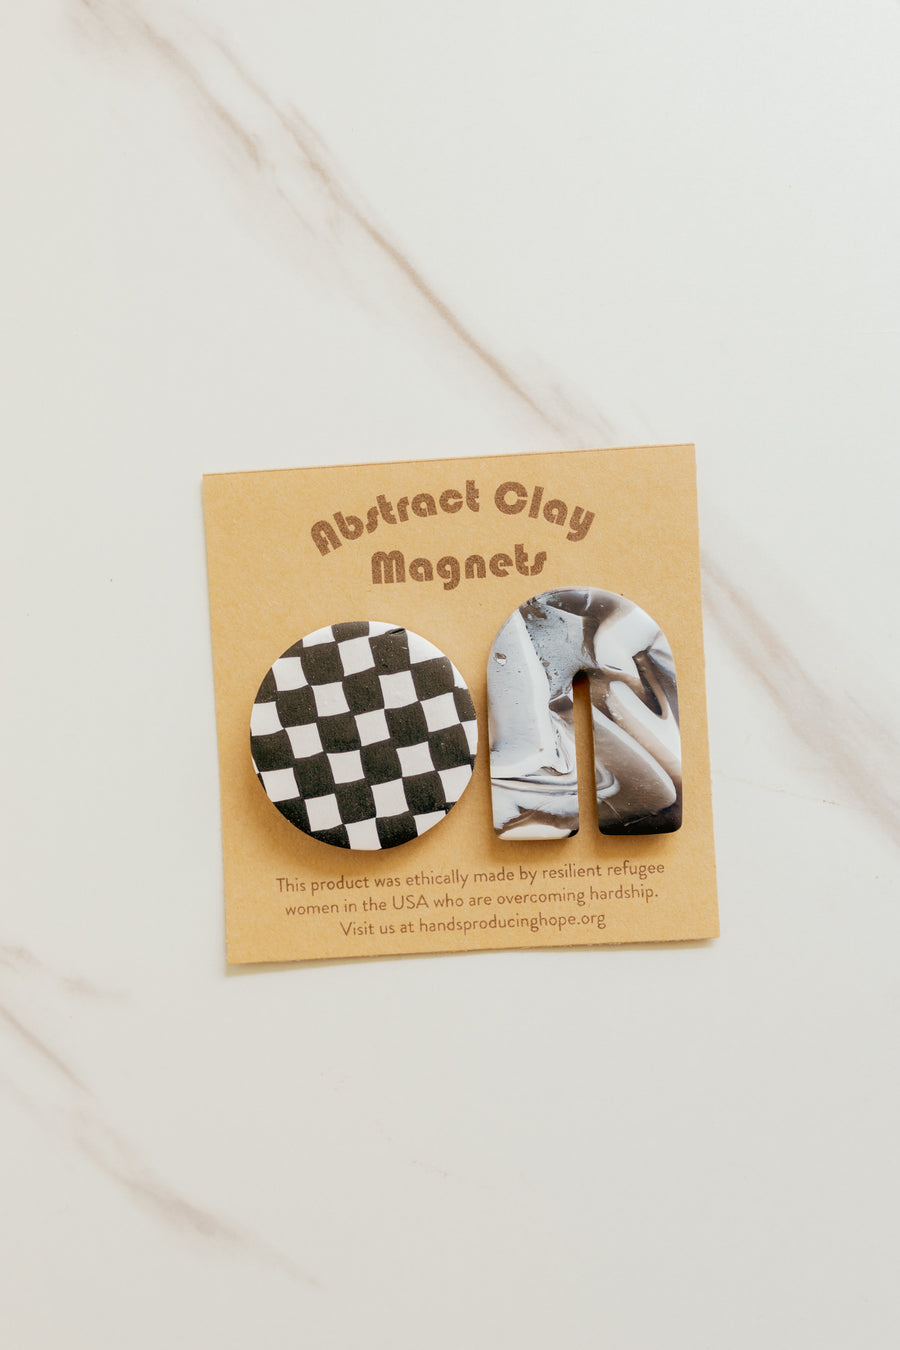 Abstract Clay Magnets